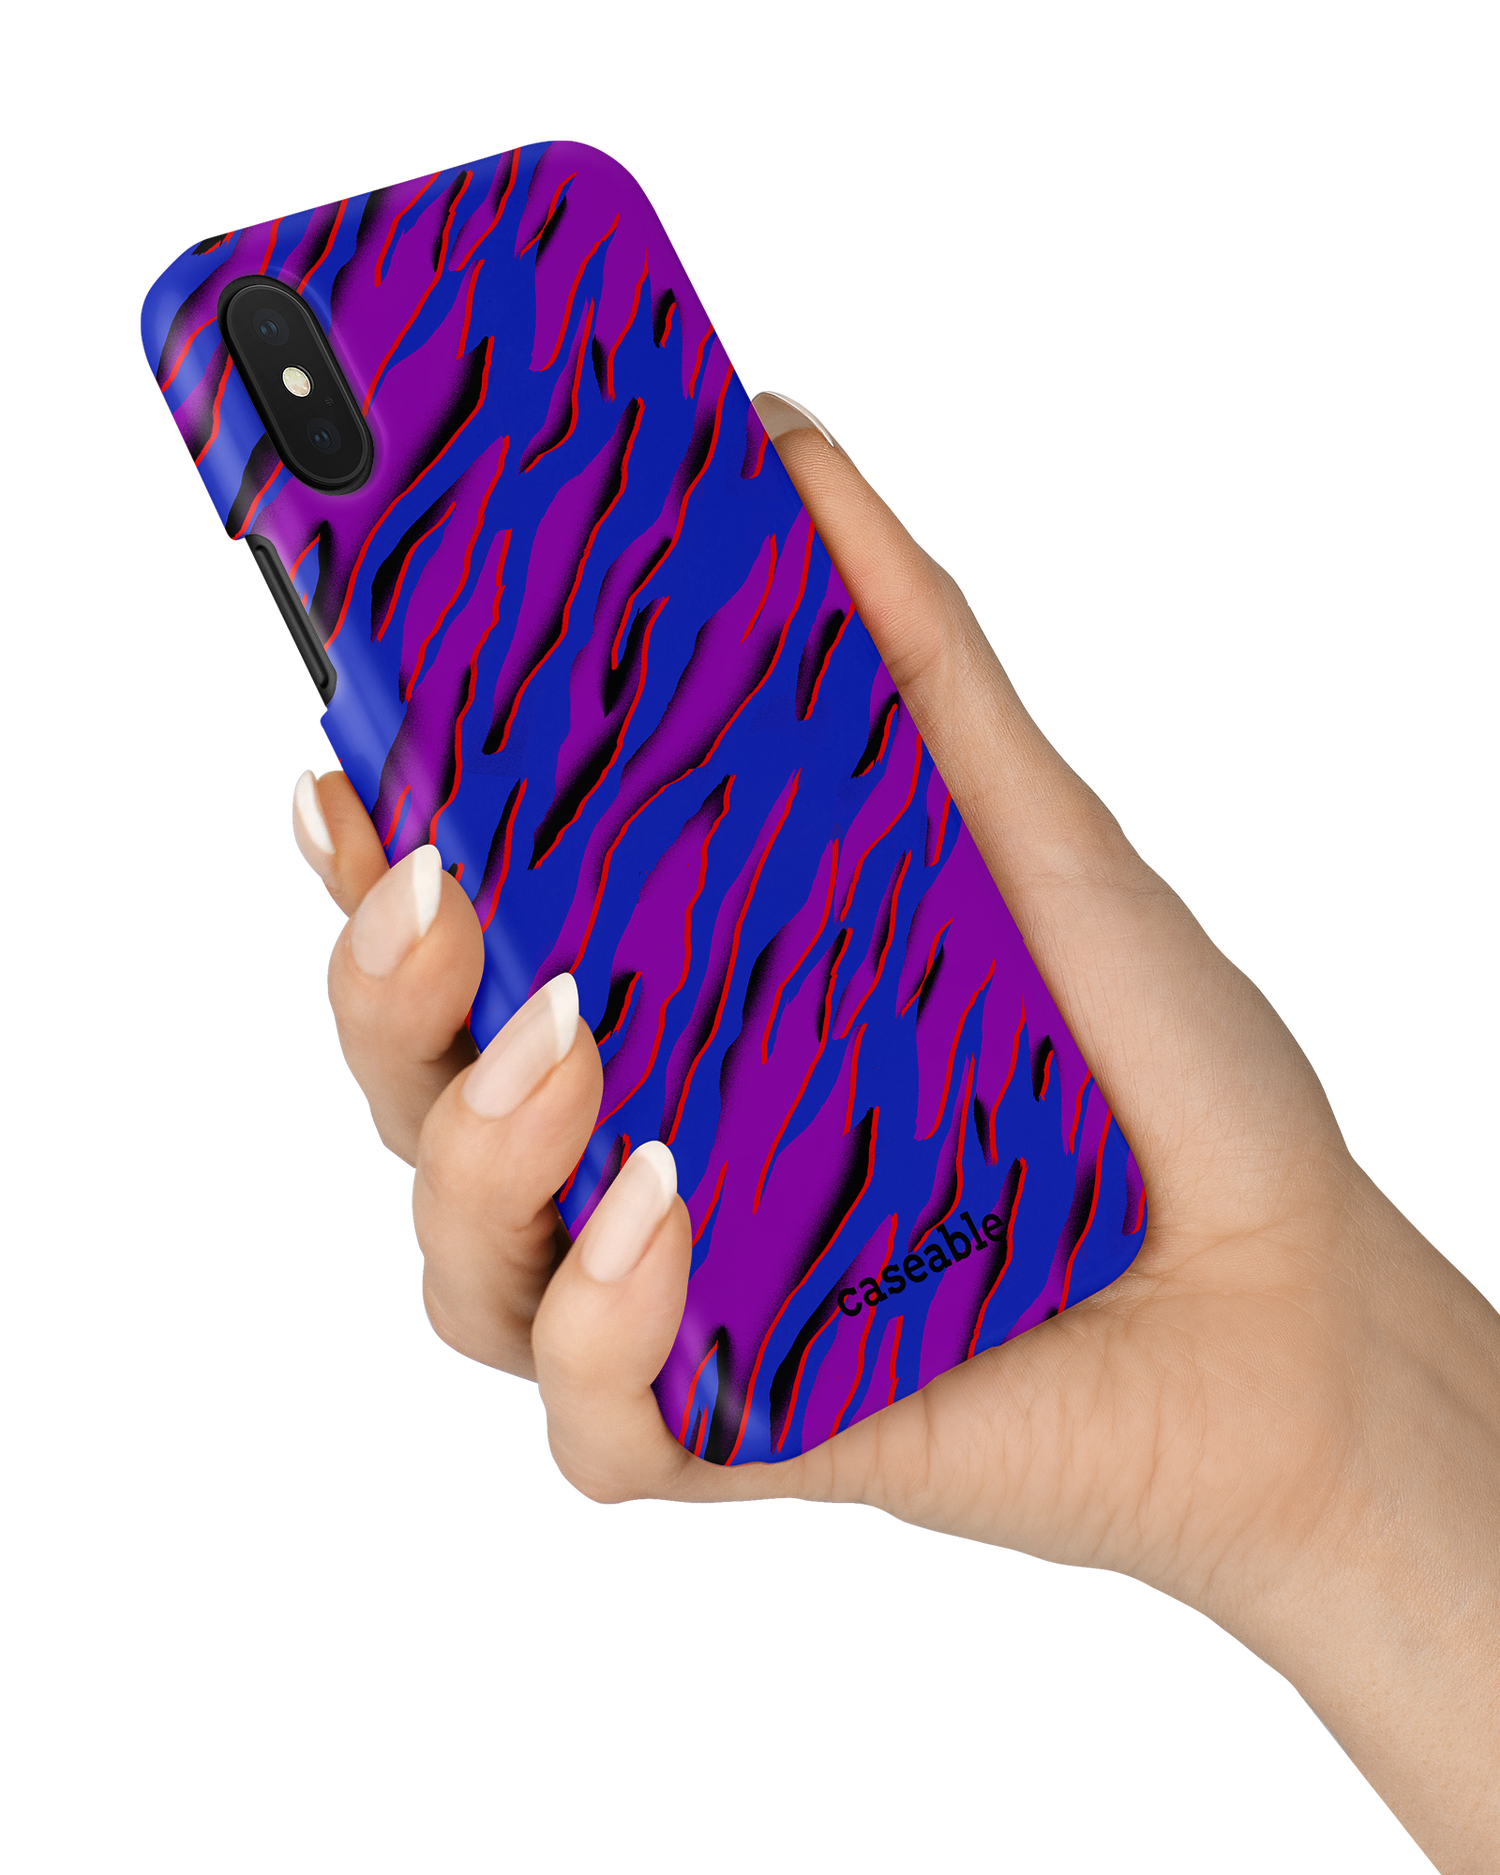 Electric Ocean 2 Hard Shell Phone Case Apple iPhone X, Apple iPhone XS held in hand